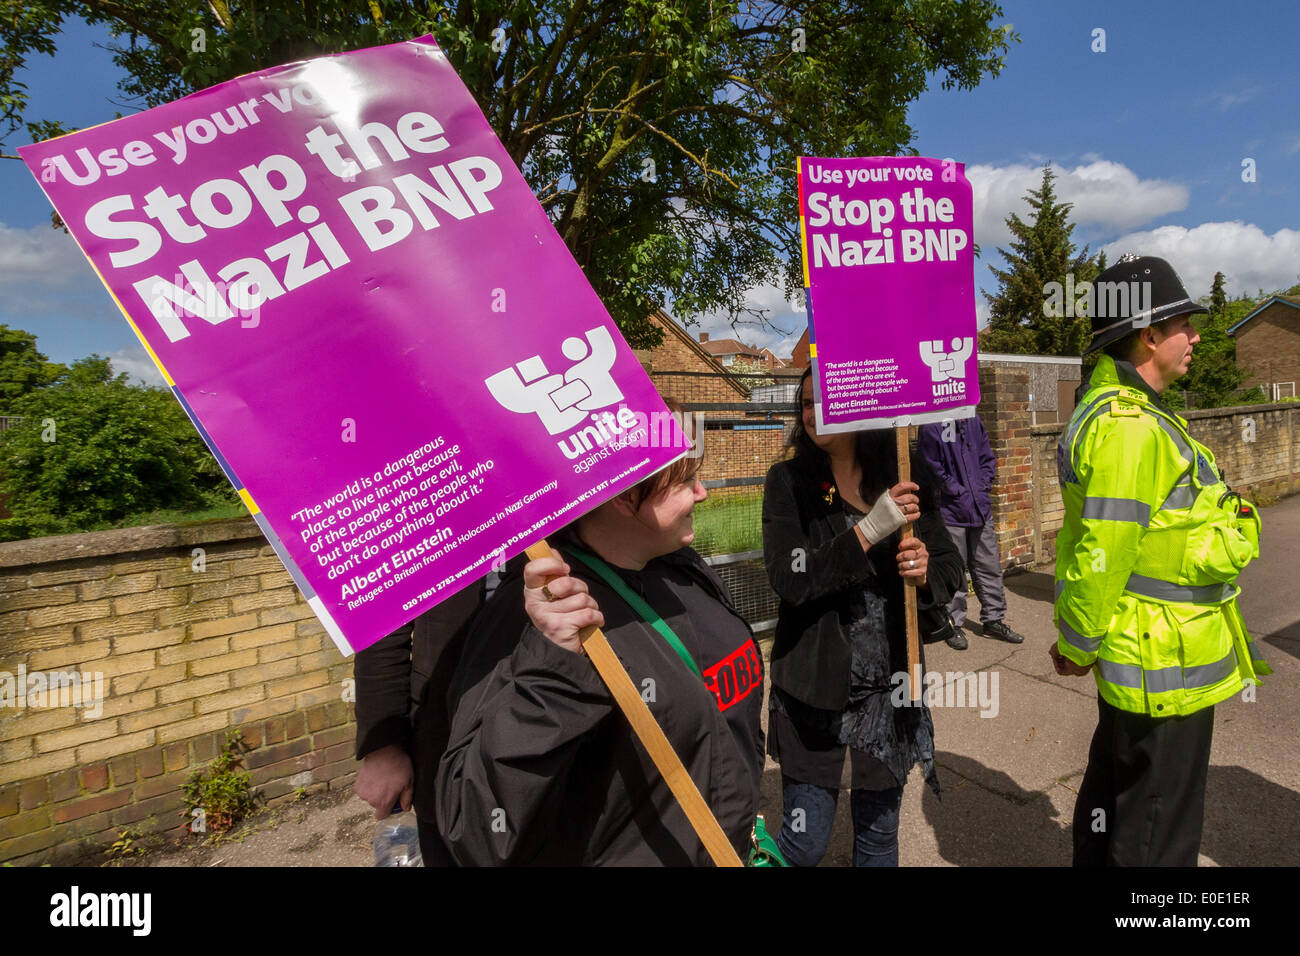 Hemel Hempstead, UK. 10th May, 2014. Members of Unite against Fascism (UAF) and Hope Not Hate groups counter-protested the British National Party (BNP) supporters in Hemel Hempstead opposite a site of derelict church that allegedly has plans to become a mosque. Credit:  Guy Corbishley/Alamy Live News Stock Photo